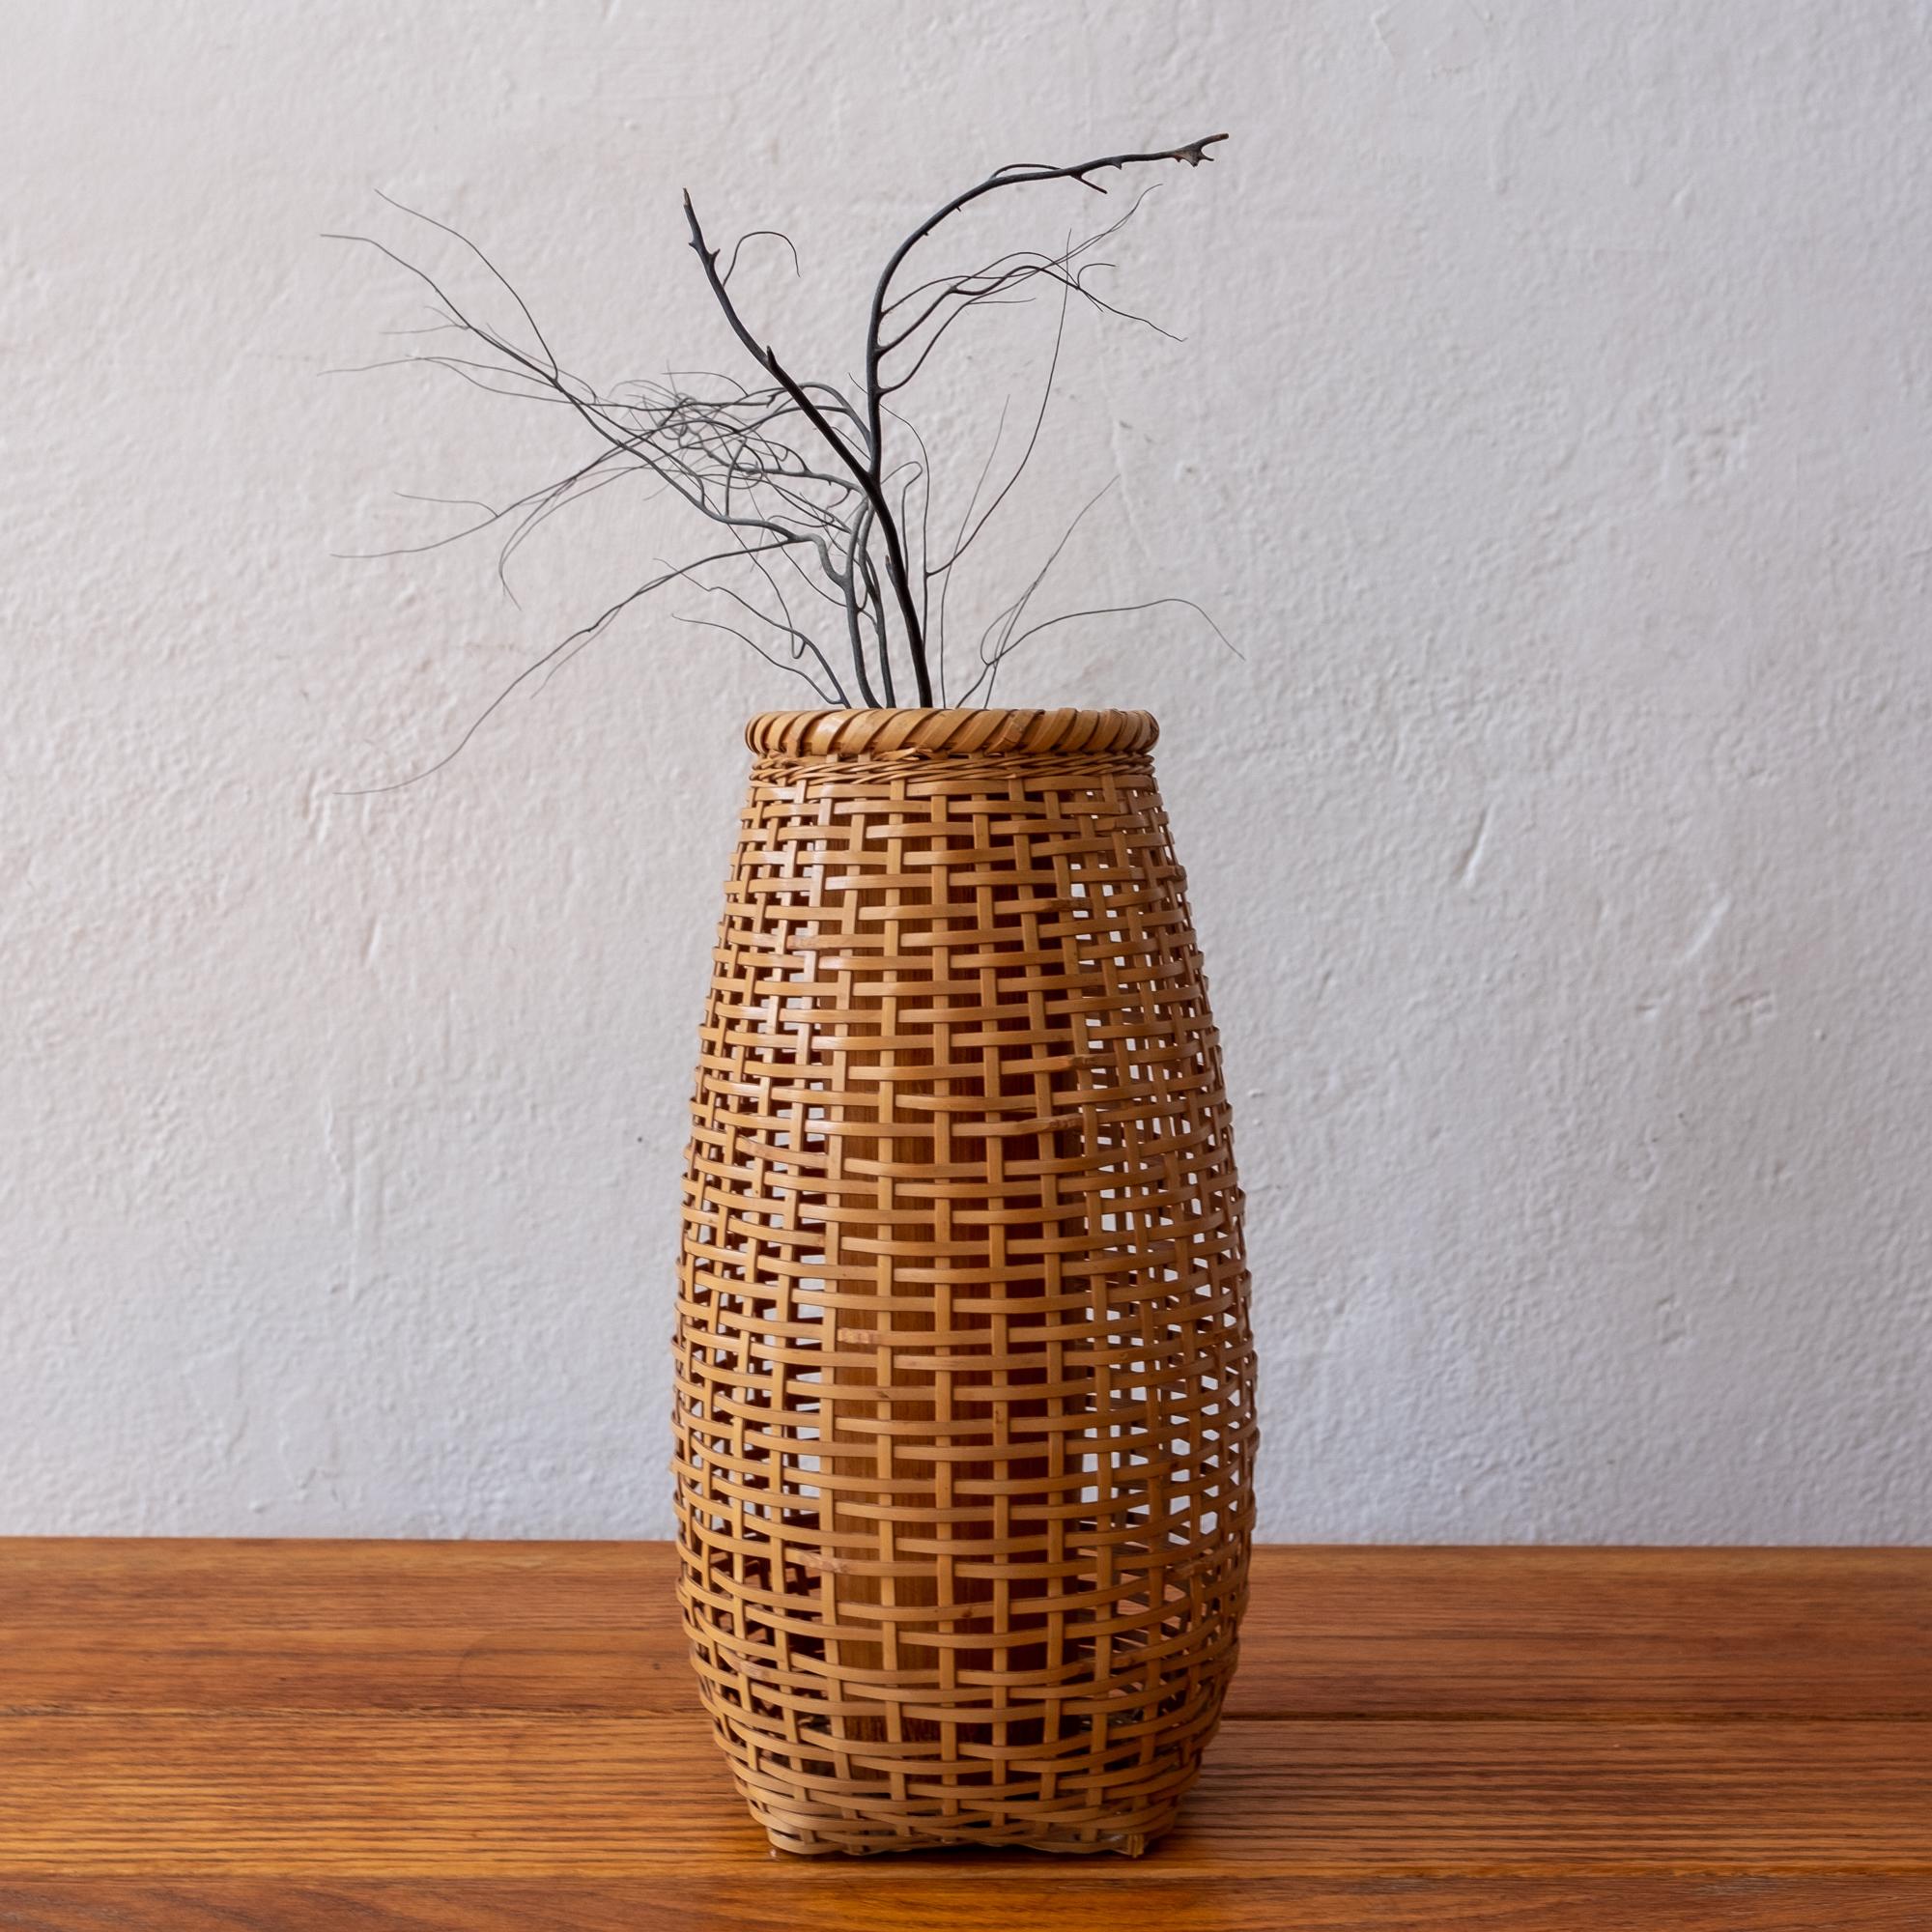 Japanese woven bamboo Ikebana basket from the Showa era. The interior bamboo stock provides a lovely silhouette.